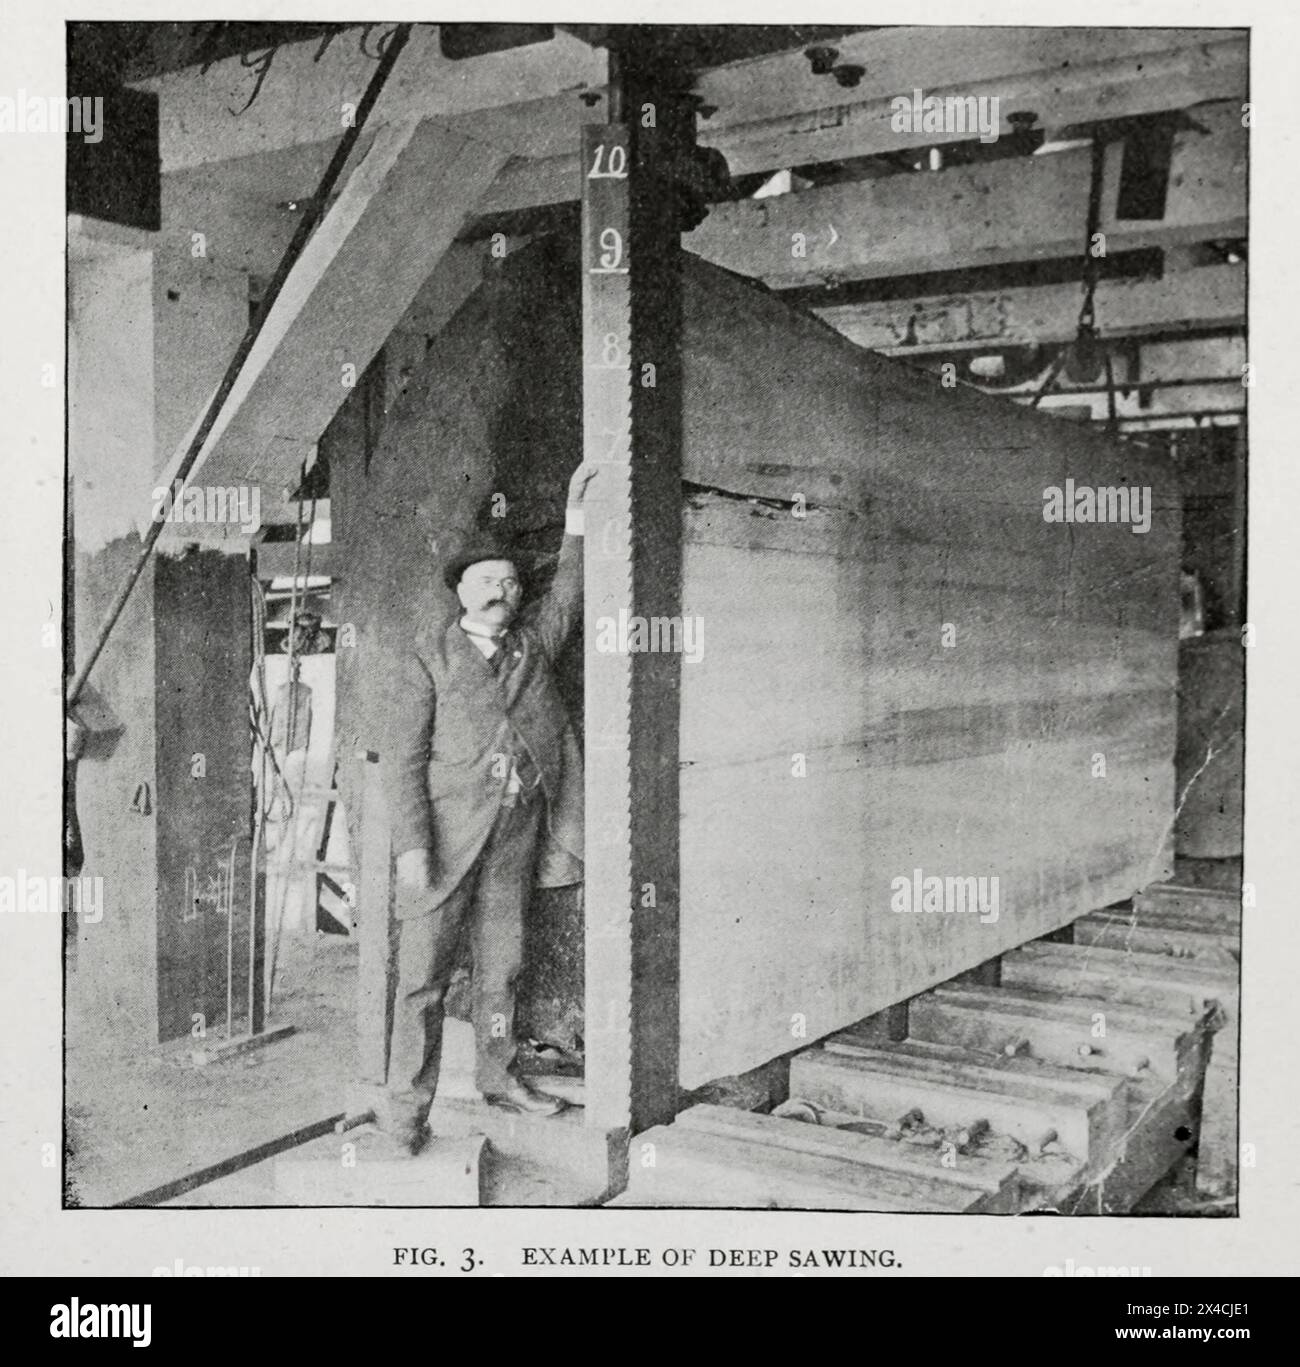 EXAMPLE OF DEEP SAWING. Showing cut, 9 ft., 6 in., deep, made with an E. P. Allis band-saw mill at Eureka. California; a fair average example of the heavy balks which can be cut only by the band-saw mill. Before the introduction of band-saws there was great waste of valuable redwood lumber on the Pacific Coast, the logs often requiring to be split by charges of blasting-powder before they could be handled by the circular saws. from the Article THE DEVELOPMENT OF WOOD-WORKING MACHINERY. By John Richards. from The Engineering Magazine Devoted to Industrial Progress Volume XVI October 1898 - Marc Stock Photo